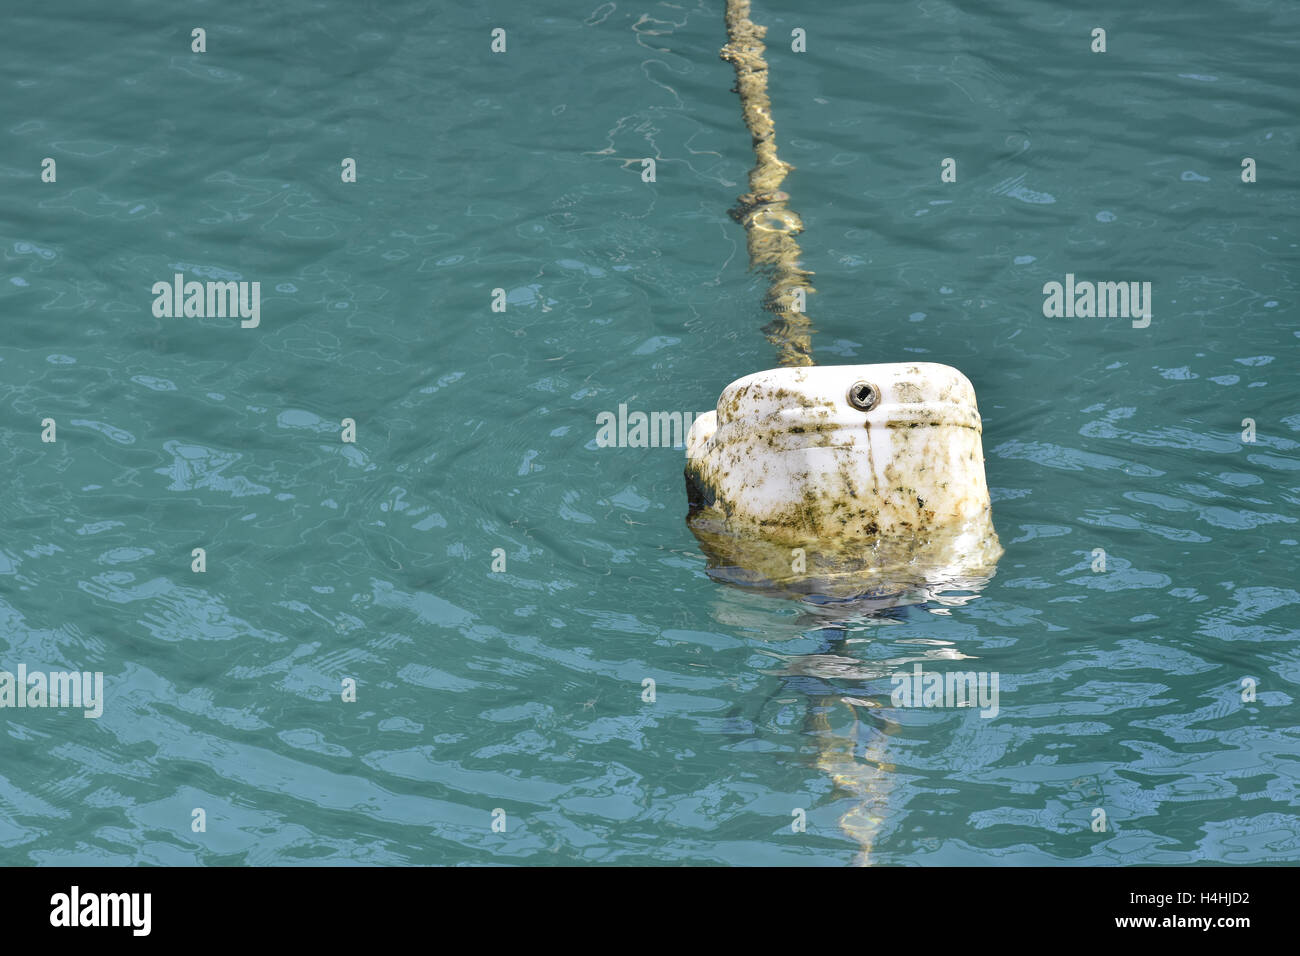 Dirty buoy made of plastic barrel attached to rope floating on green water surface. Stock Photo